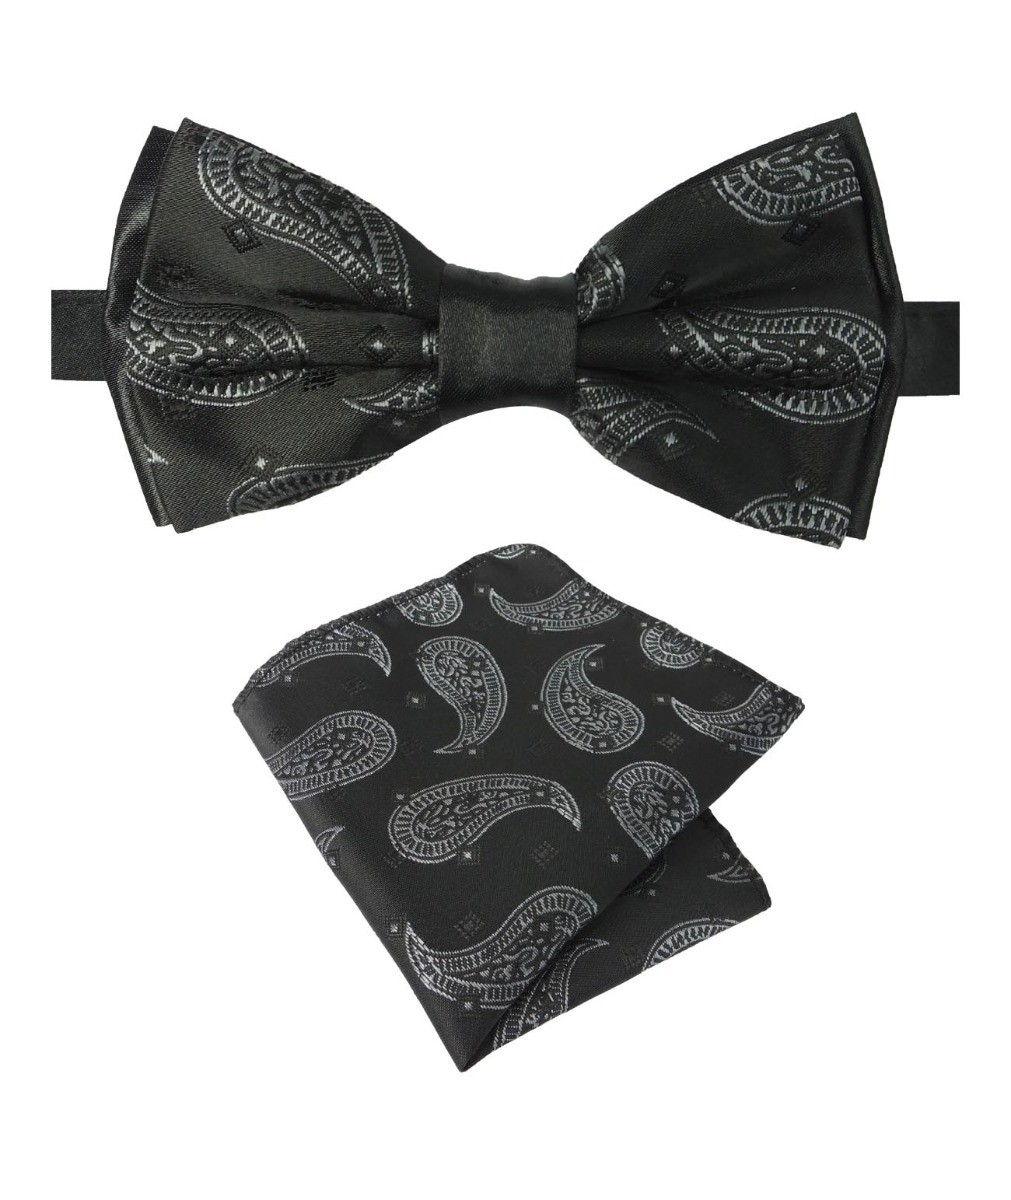 Boys & Men's Paisley Bow Tie and Hanky Set - Black and White